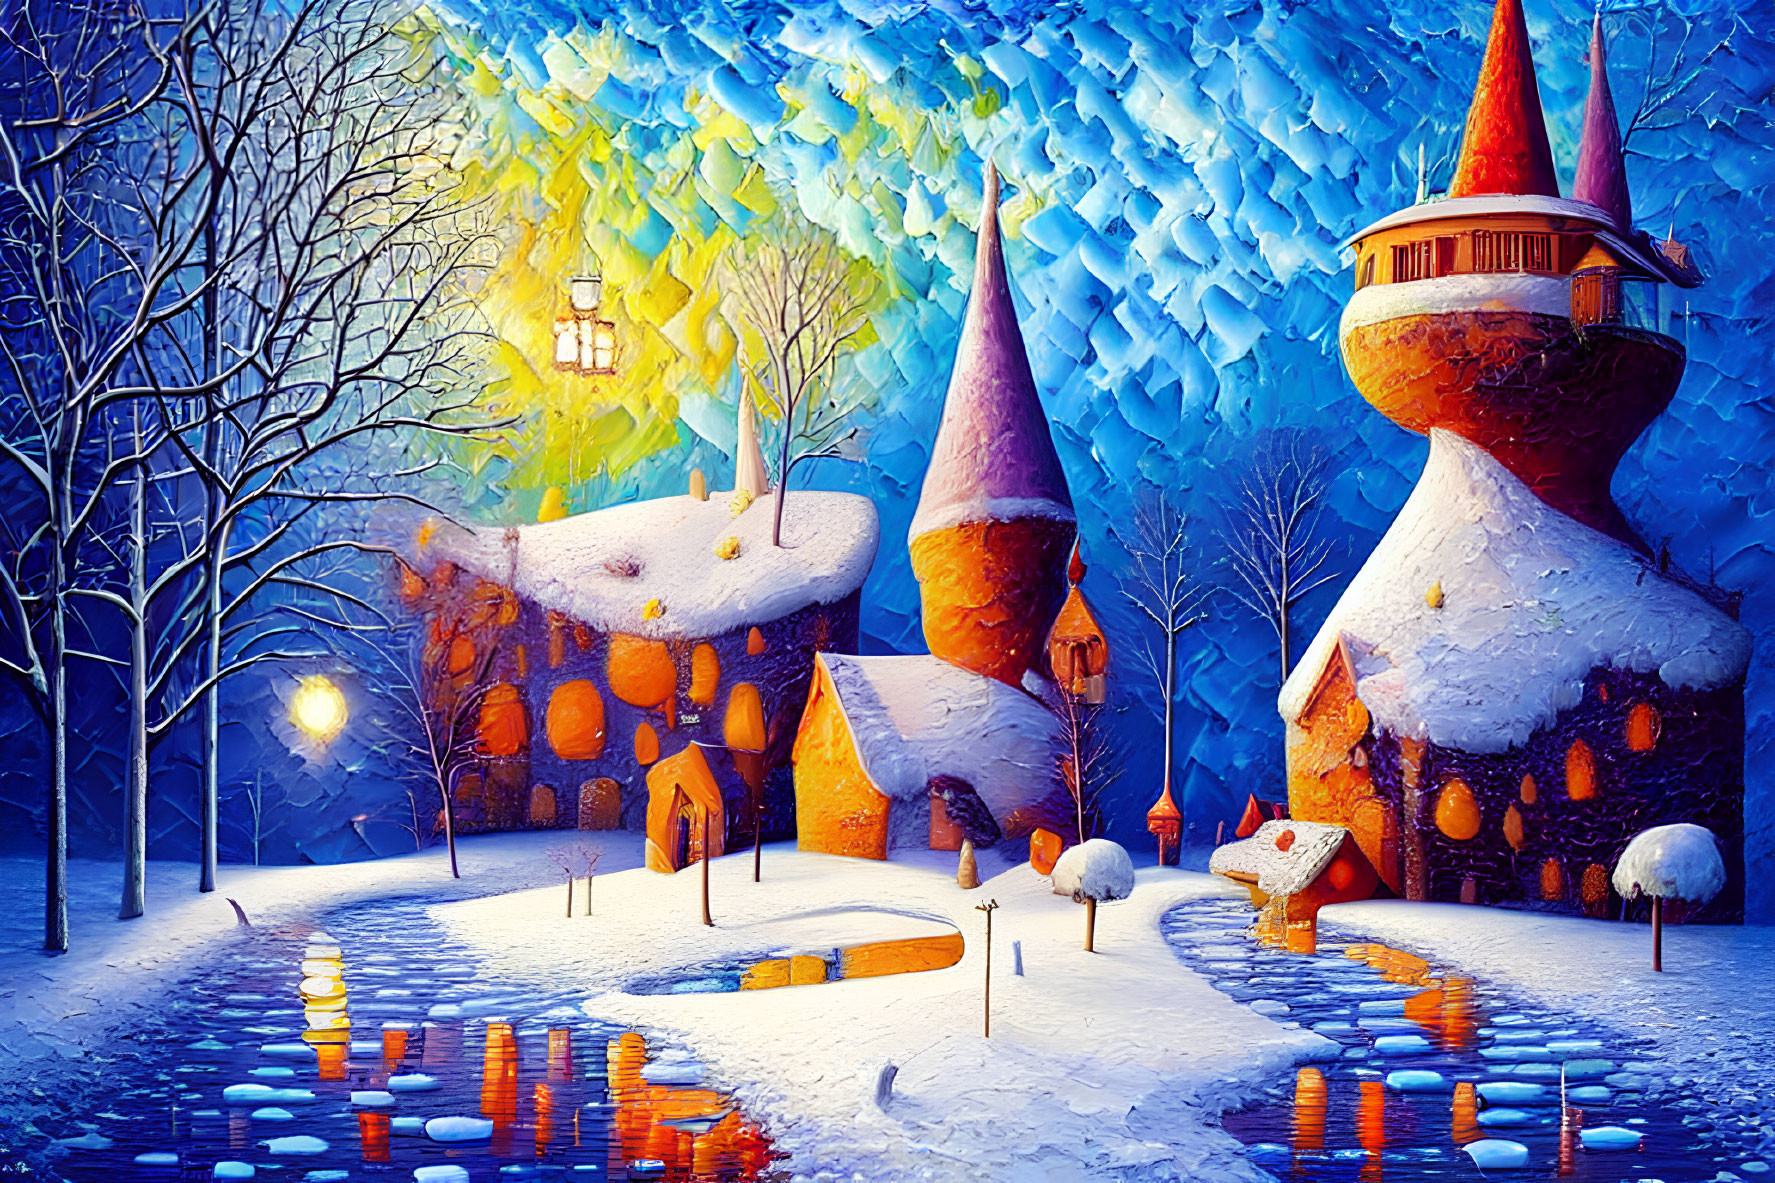 Colorful Winter Scene Painting with Snow-Covered Houses and Starry Sky